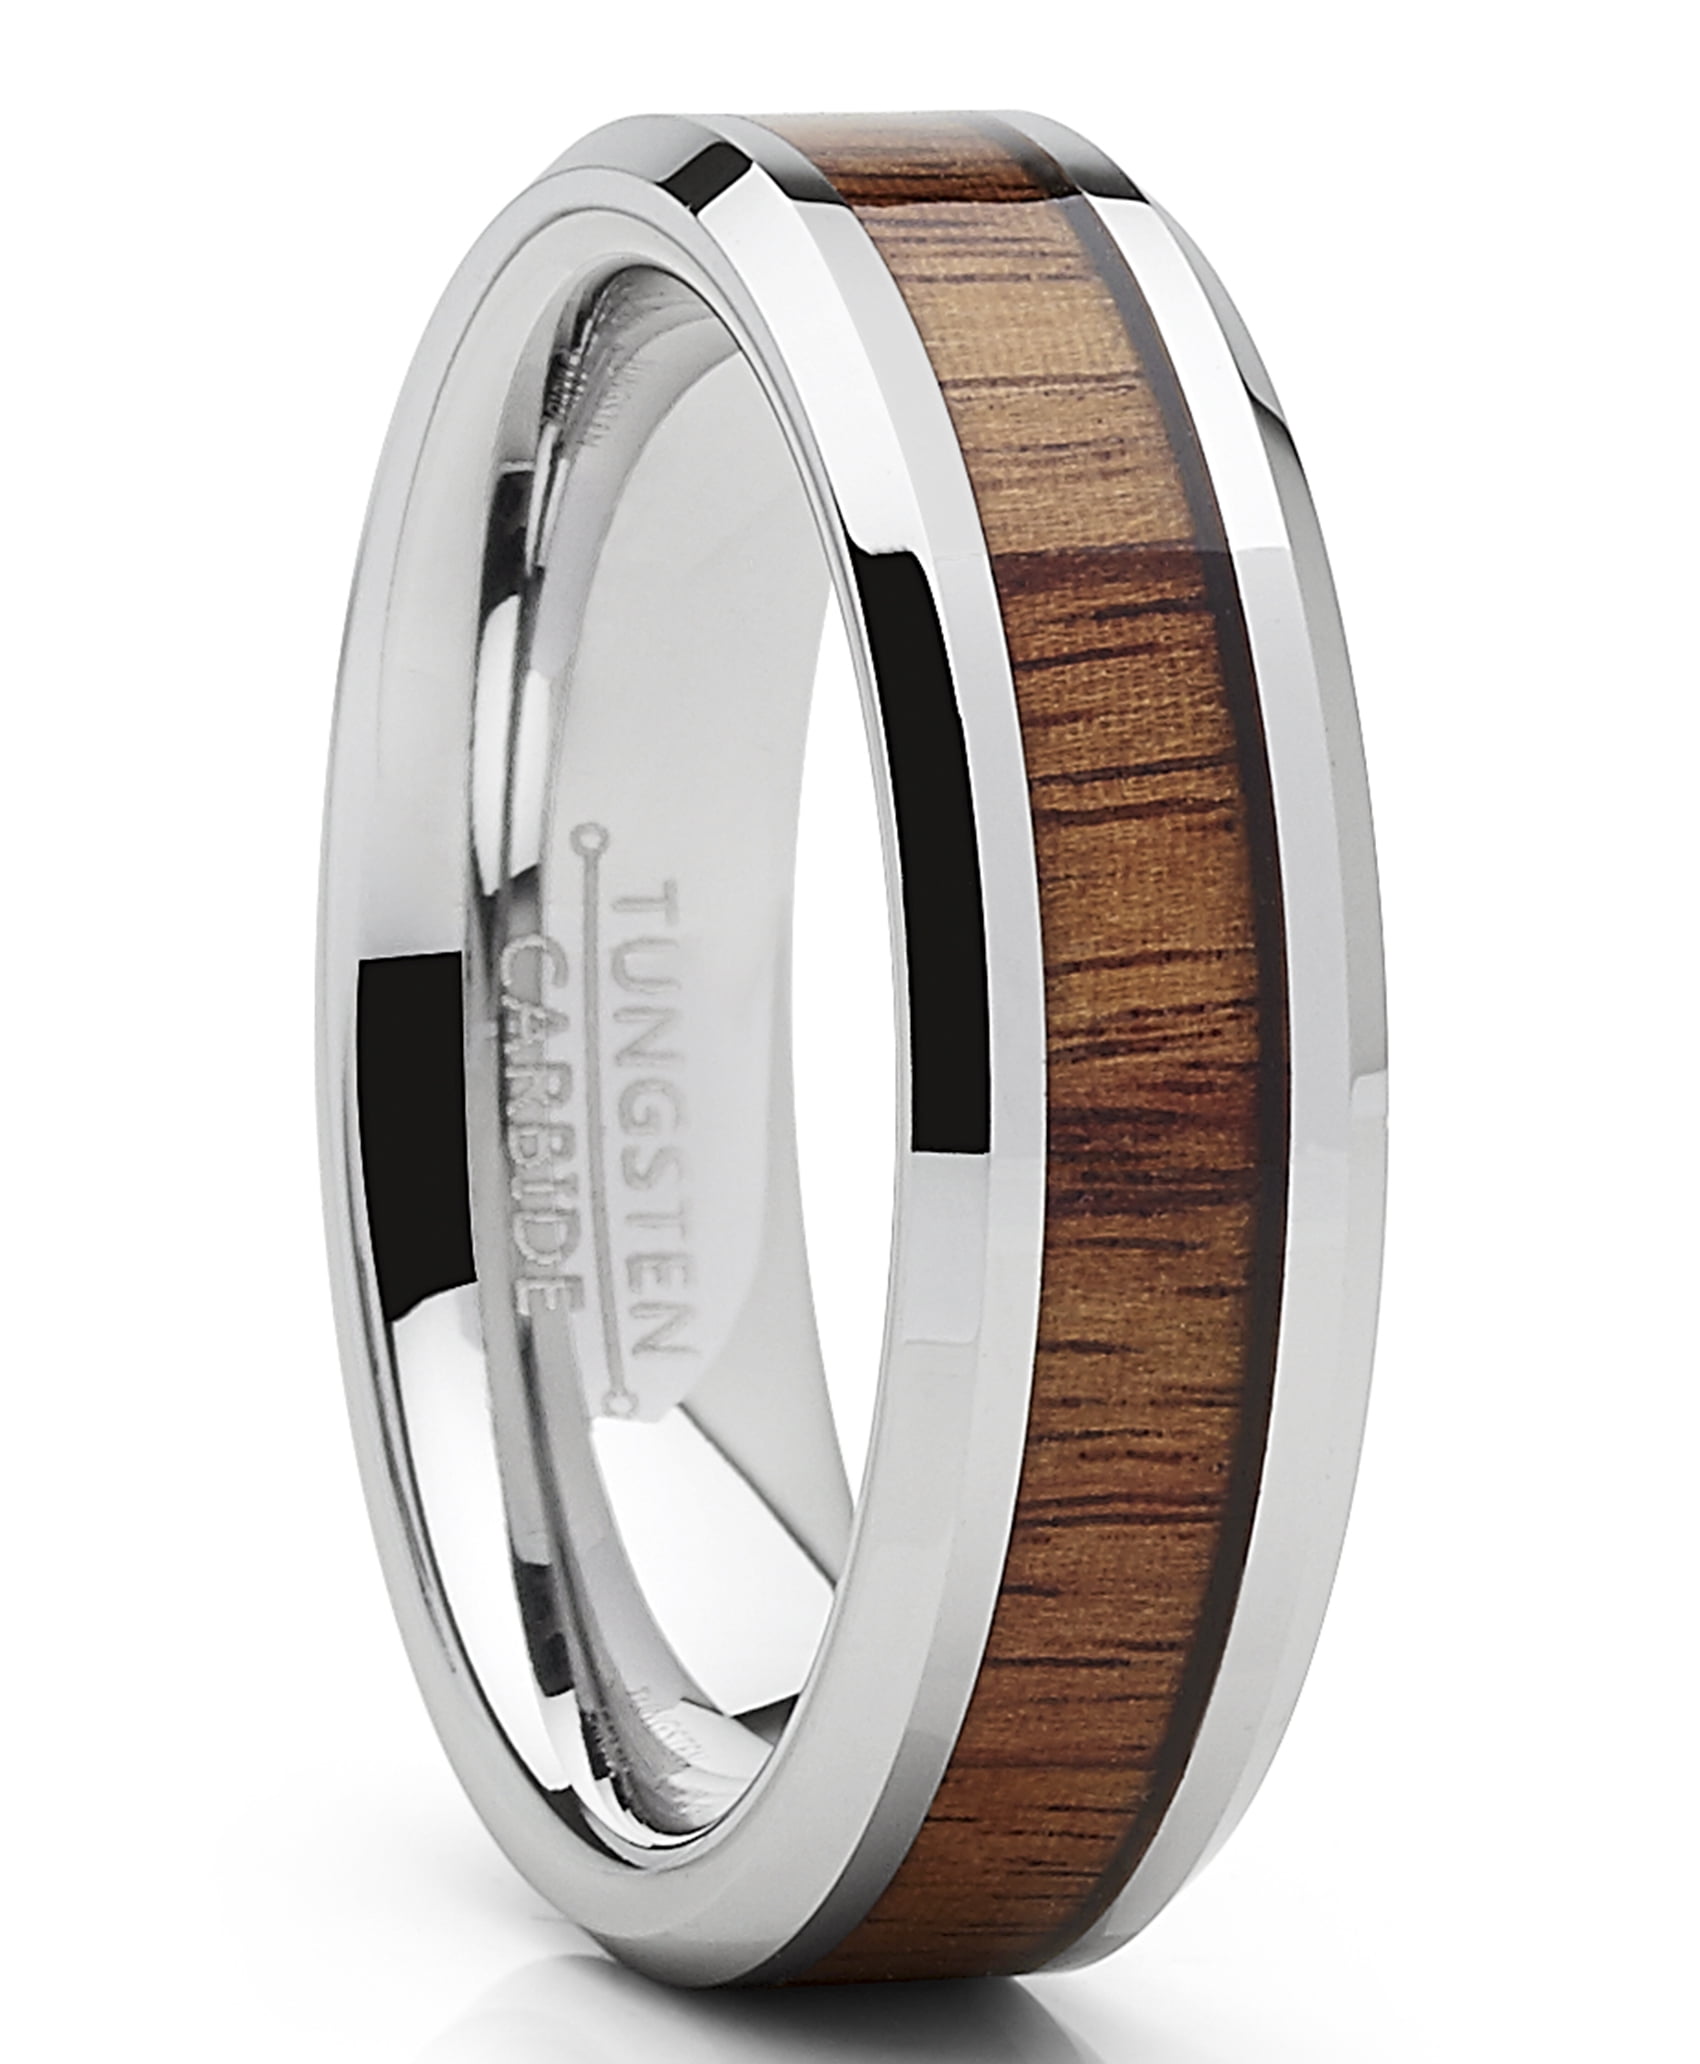 King Will Mens 8mm/6mm Black Rosewood Titanium Wedding Ring Real Wood Inlay Comfort Fit Brushed Center 